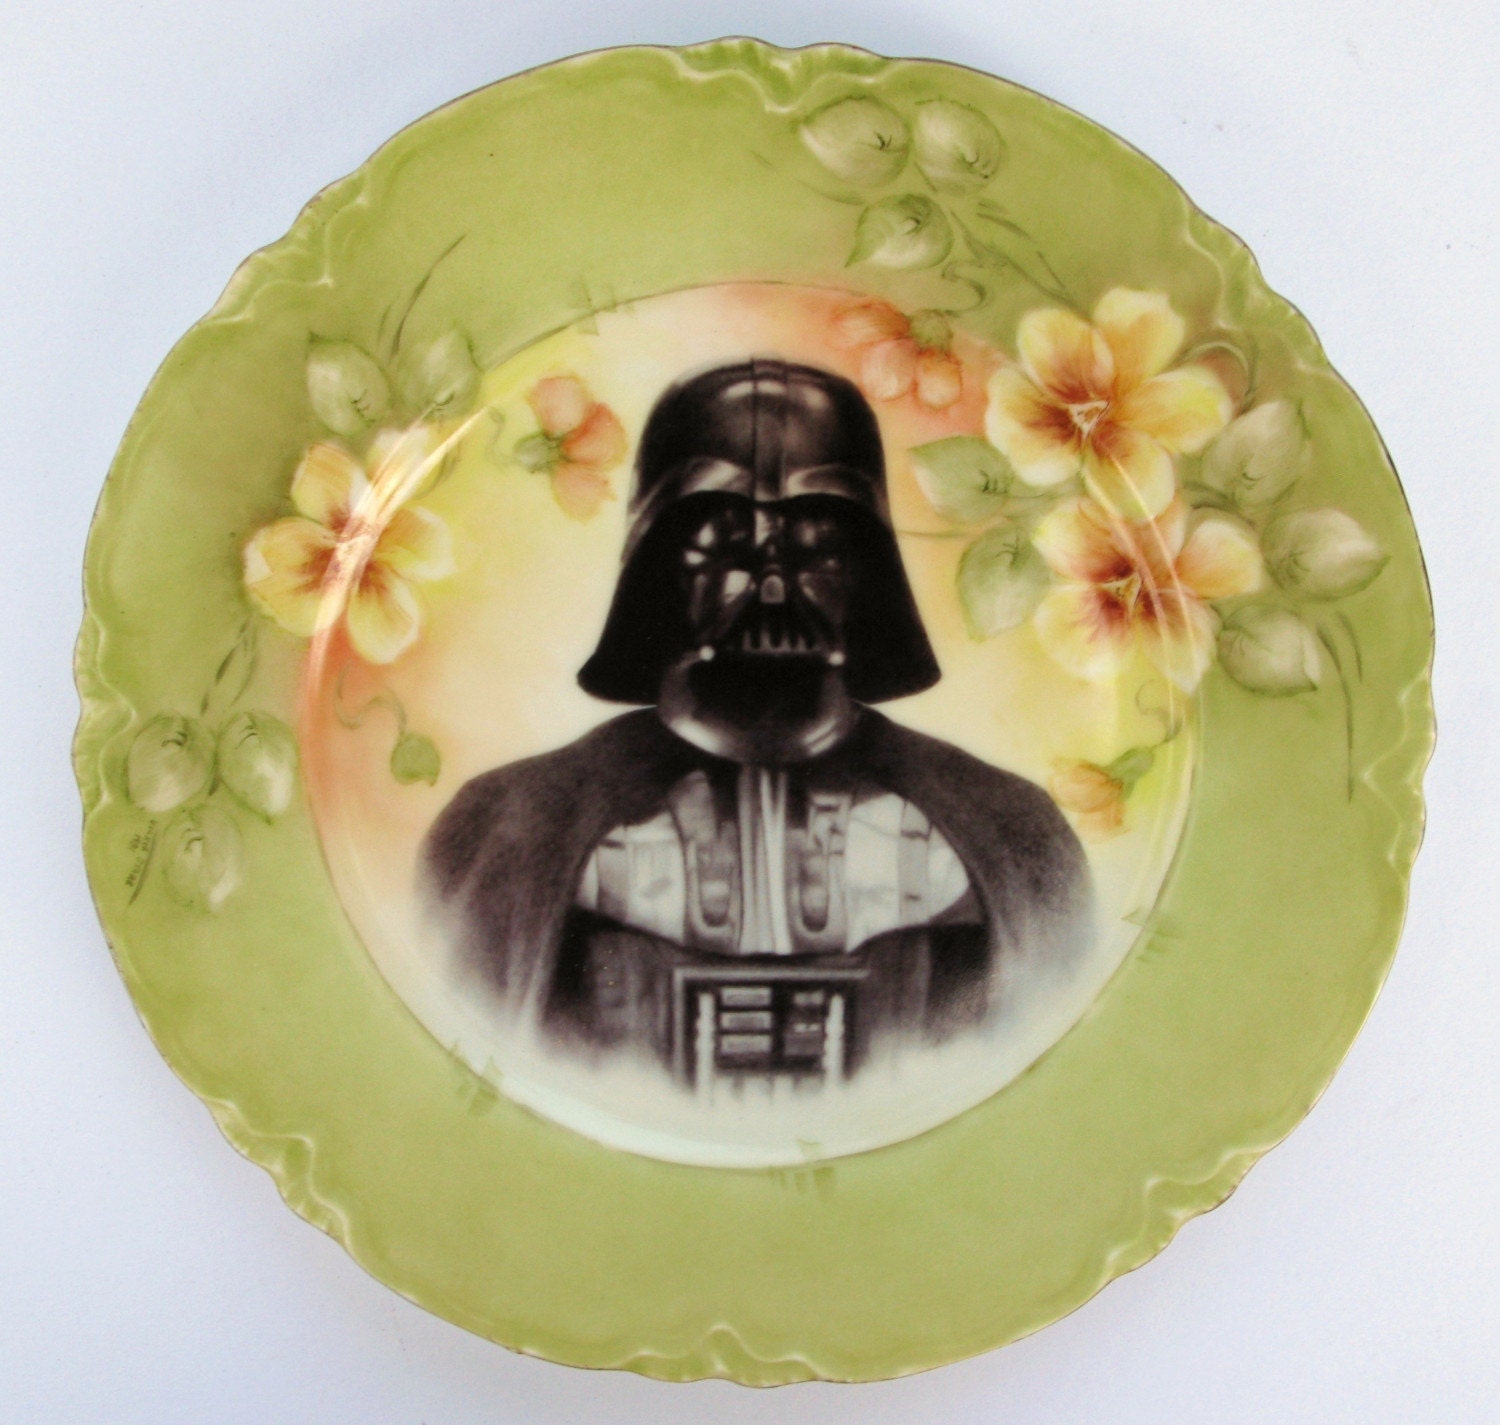 Dark Lord, Darth Vader Portrait Plate - Altered Antique Plate - BeatUpCreations on Etsy